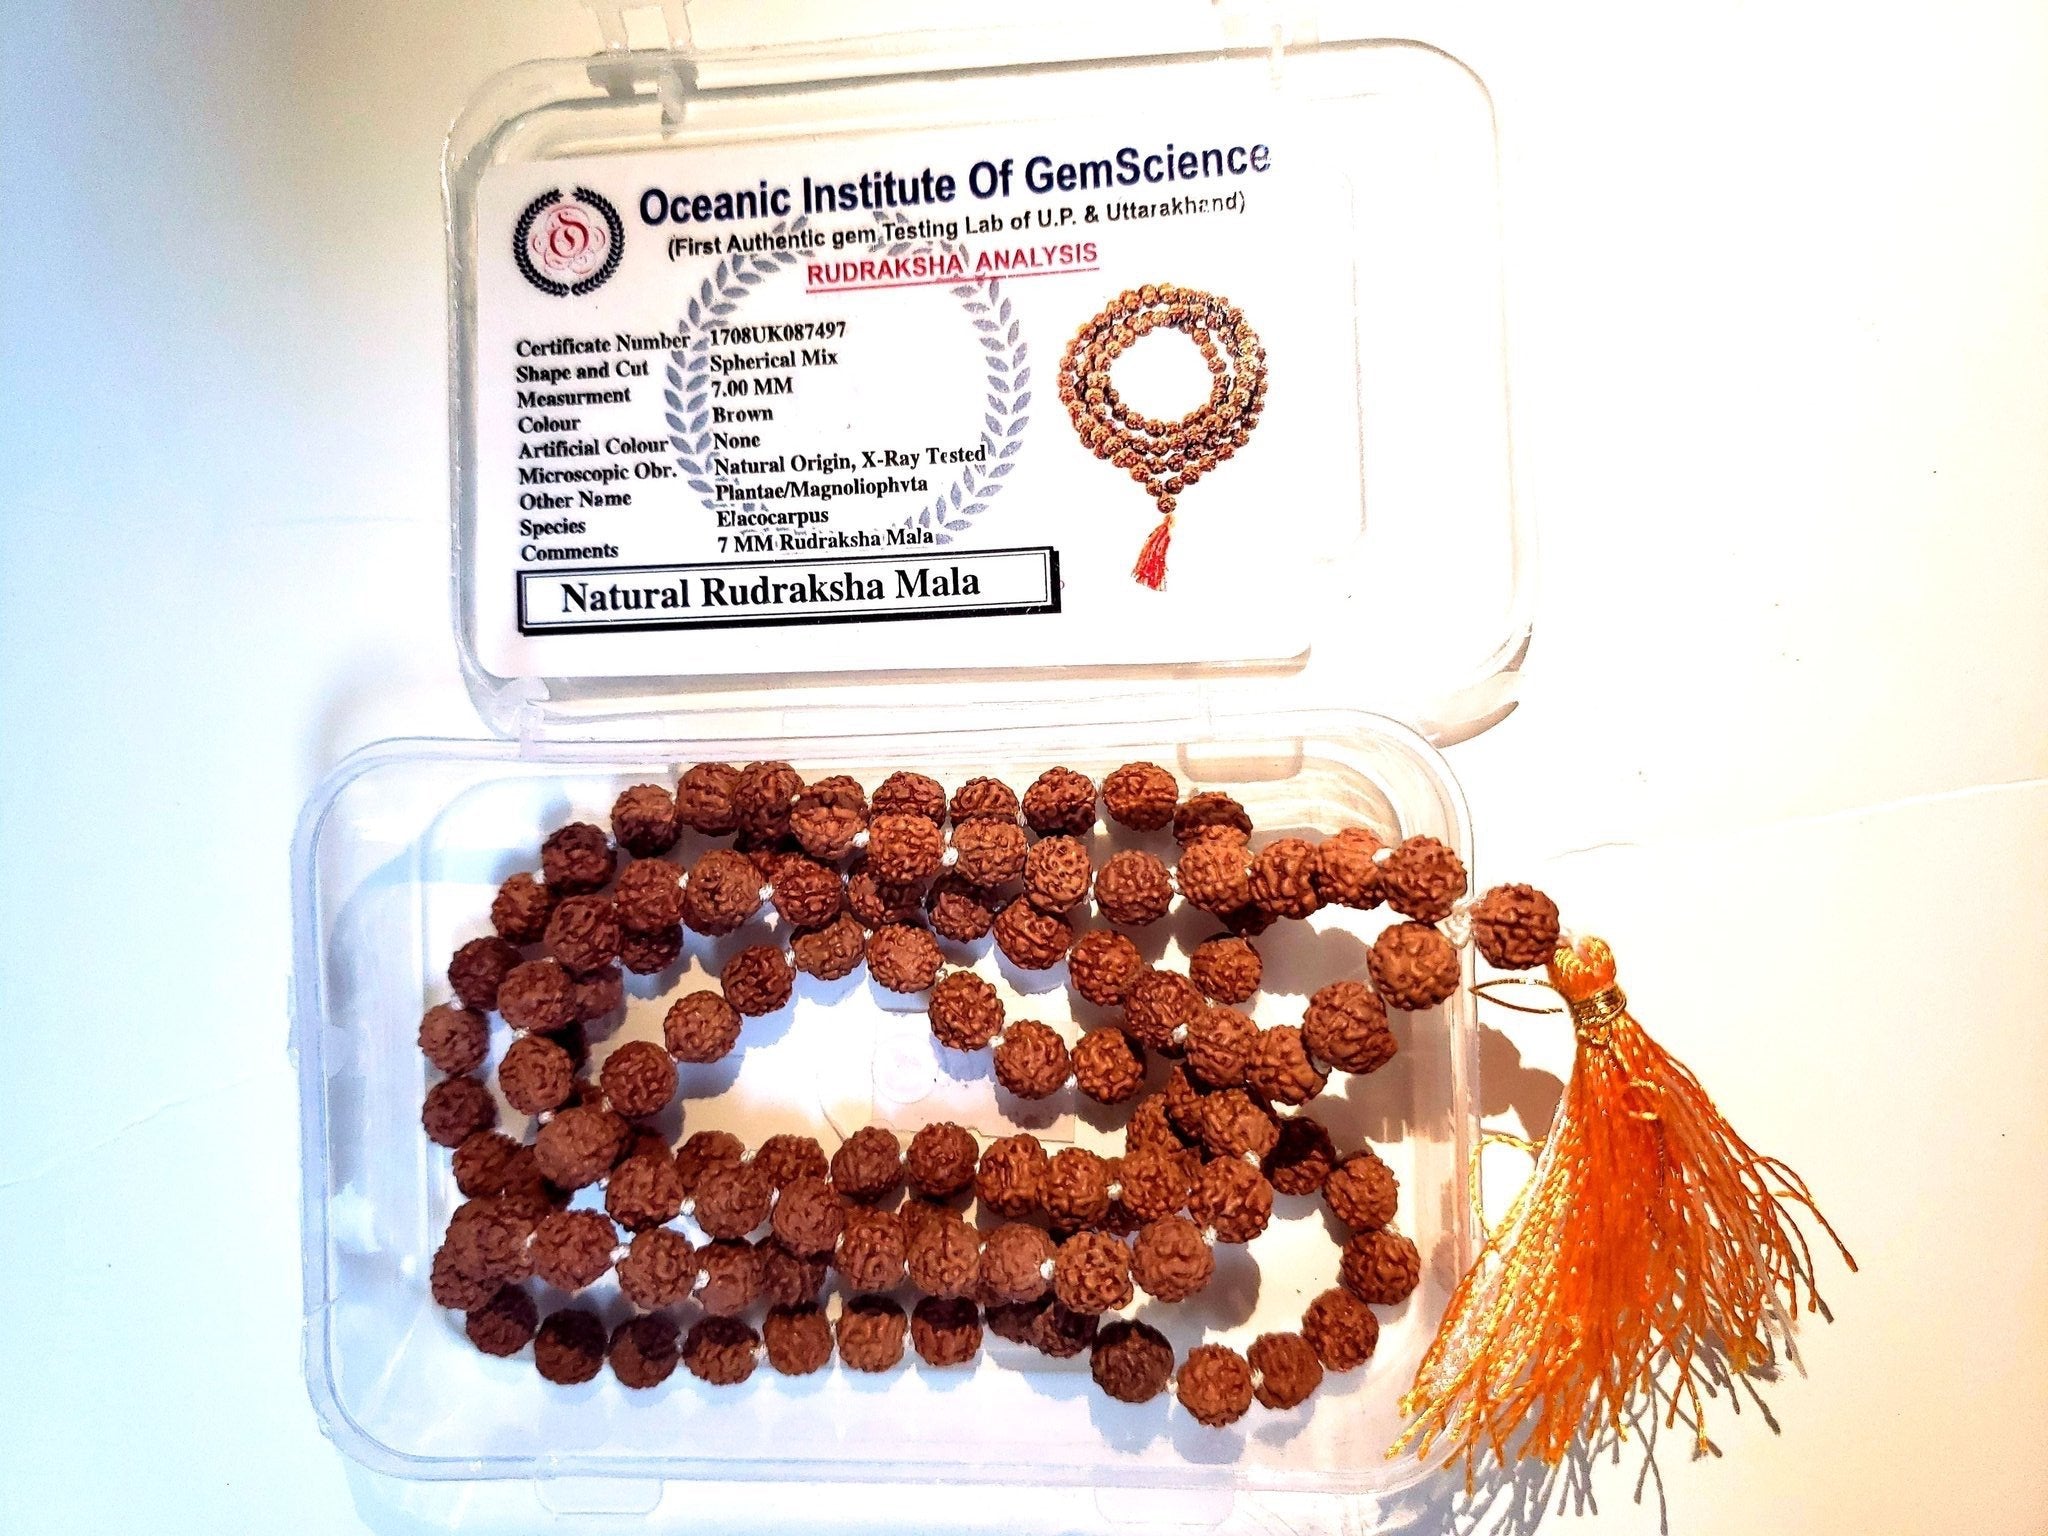 Shiva Rudraksha Mala (Orange) - Top grade lab certified Japa Mala from Haridwar, India. 108+1 prayer beads in 88 cm knotted orange thread with a tassel. 7mm bead size with 5 faces (Panch Mukhi). All our Rudraksha beads are spiritually activated with mantras before shipment.